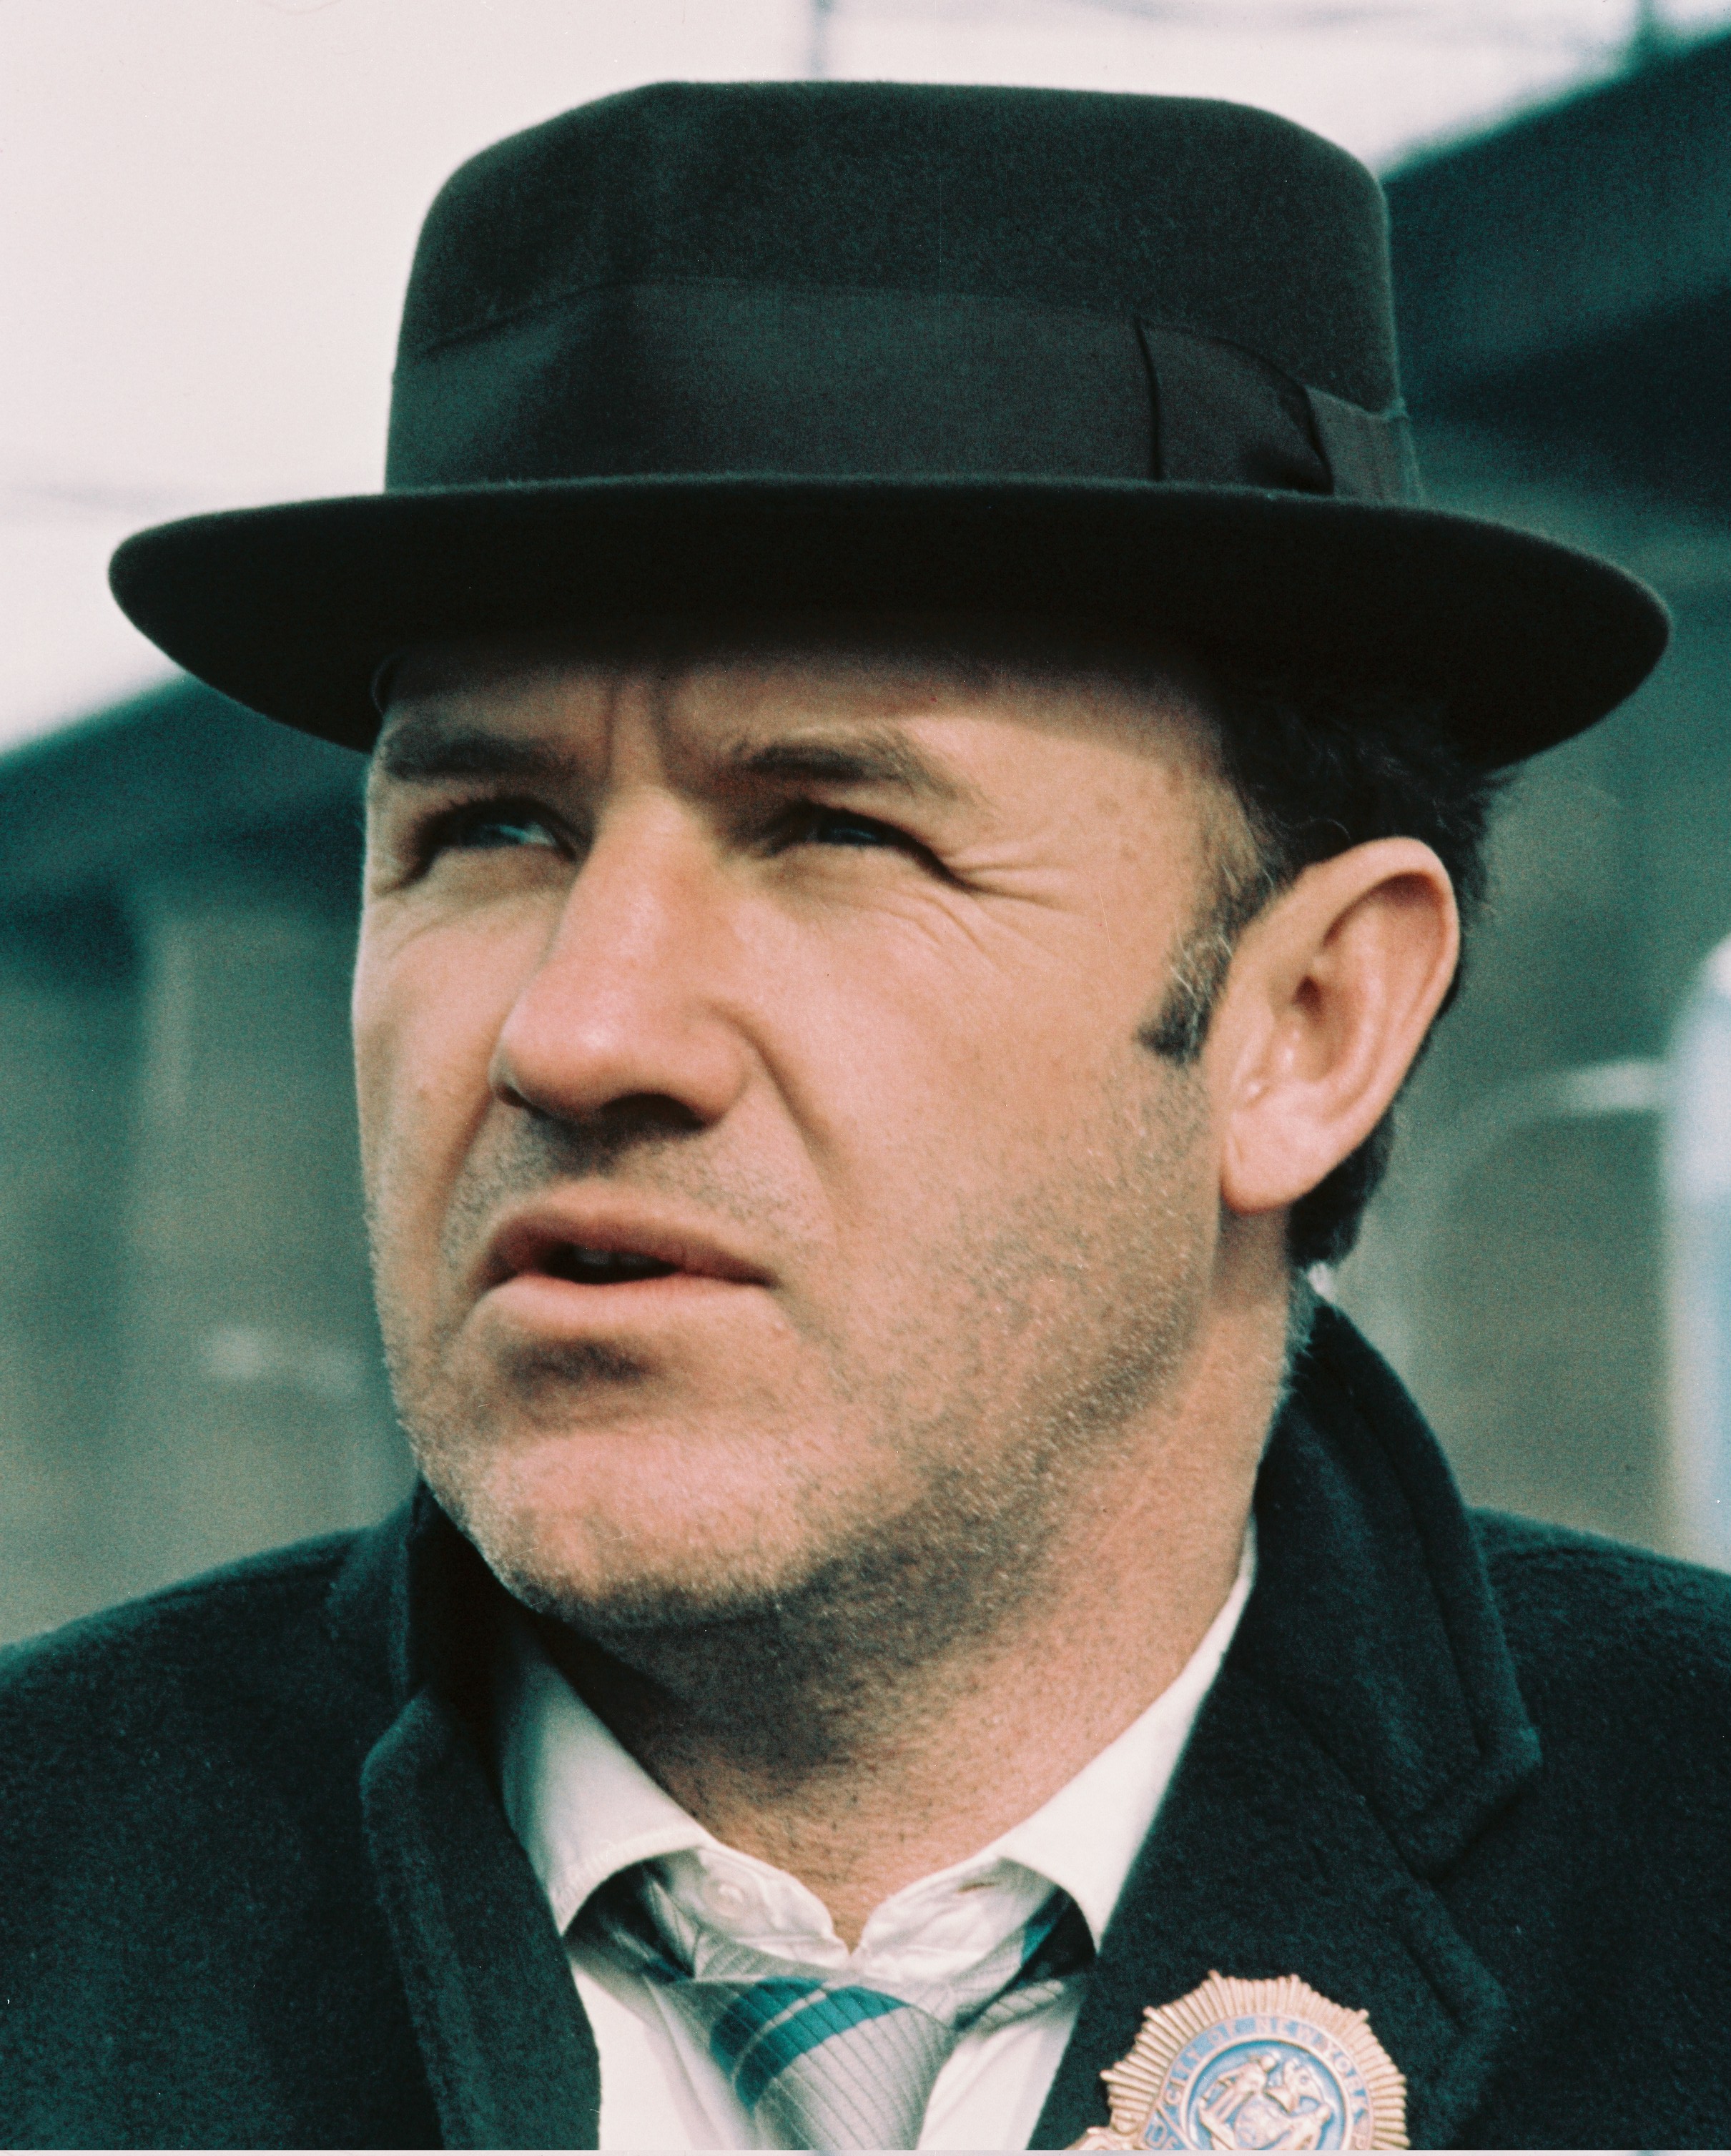 Gene Hackman as Detective Jimmy "Popeye" Doylein in a publicity portrait for the film, "The French Connection," circa 1971 | Source: Getty Images